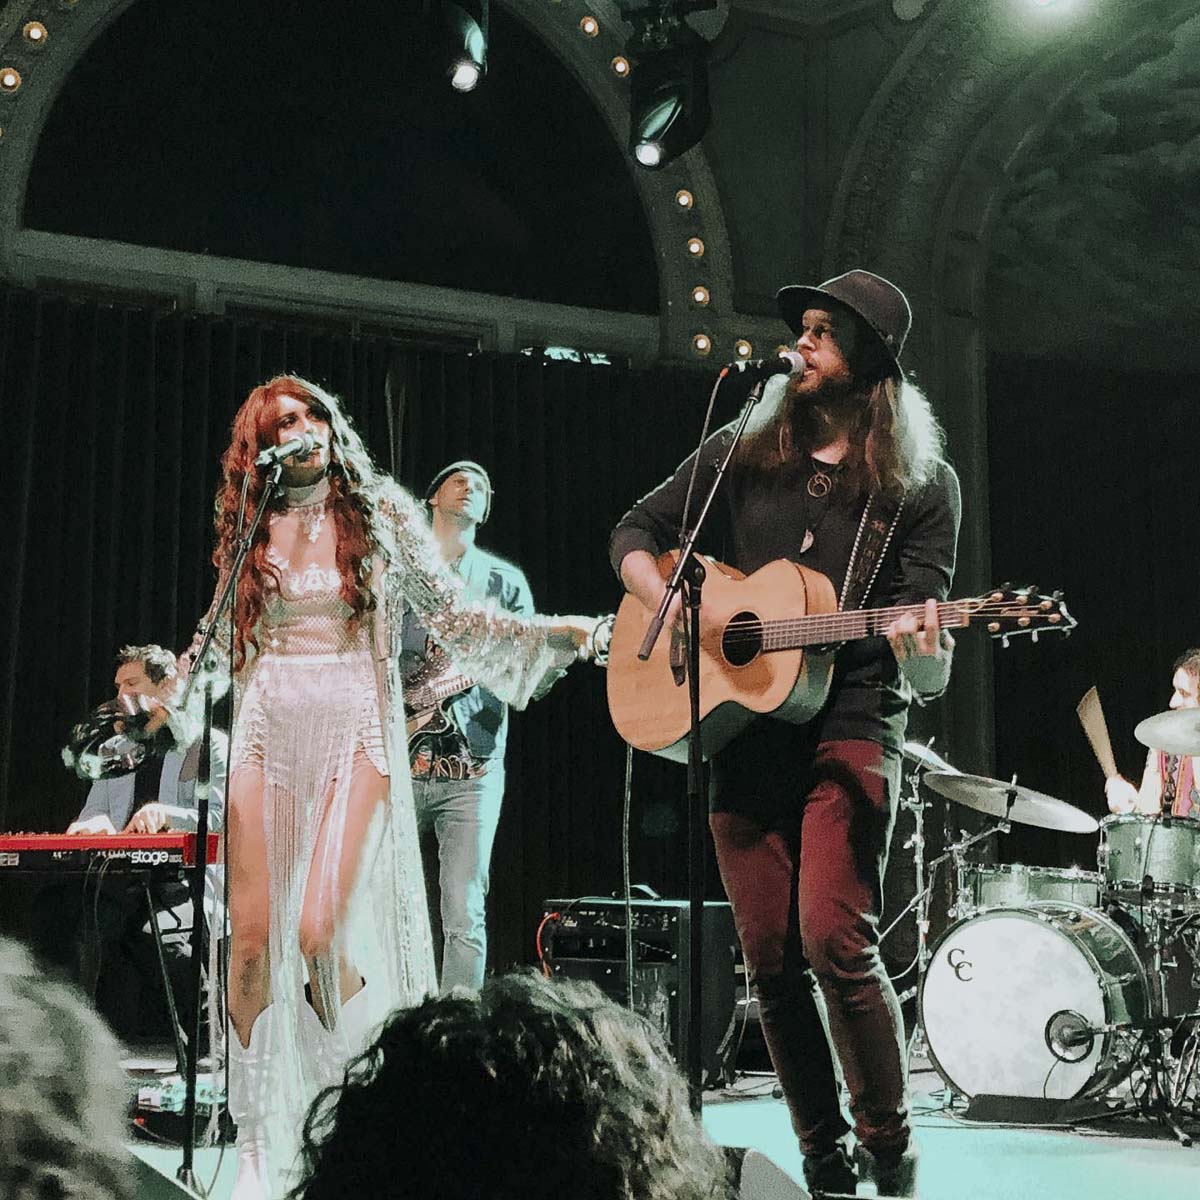 Fox and Bones has performed all over, including many shows right here at home like this one at the McMenamins Crystal Ballroom. Photo courtesy of Fox and Bones